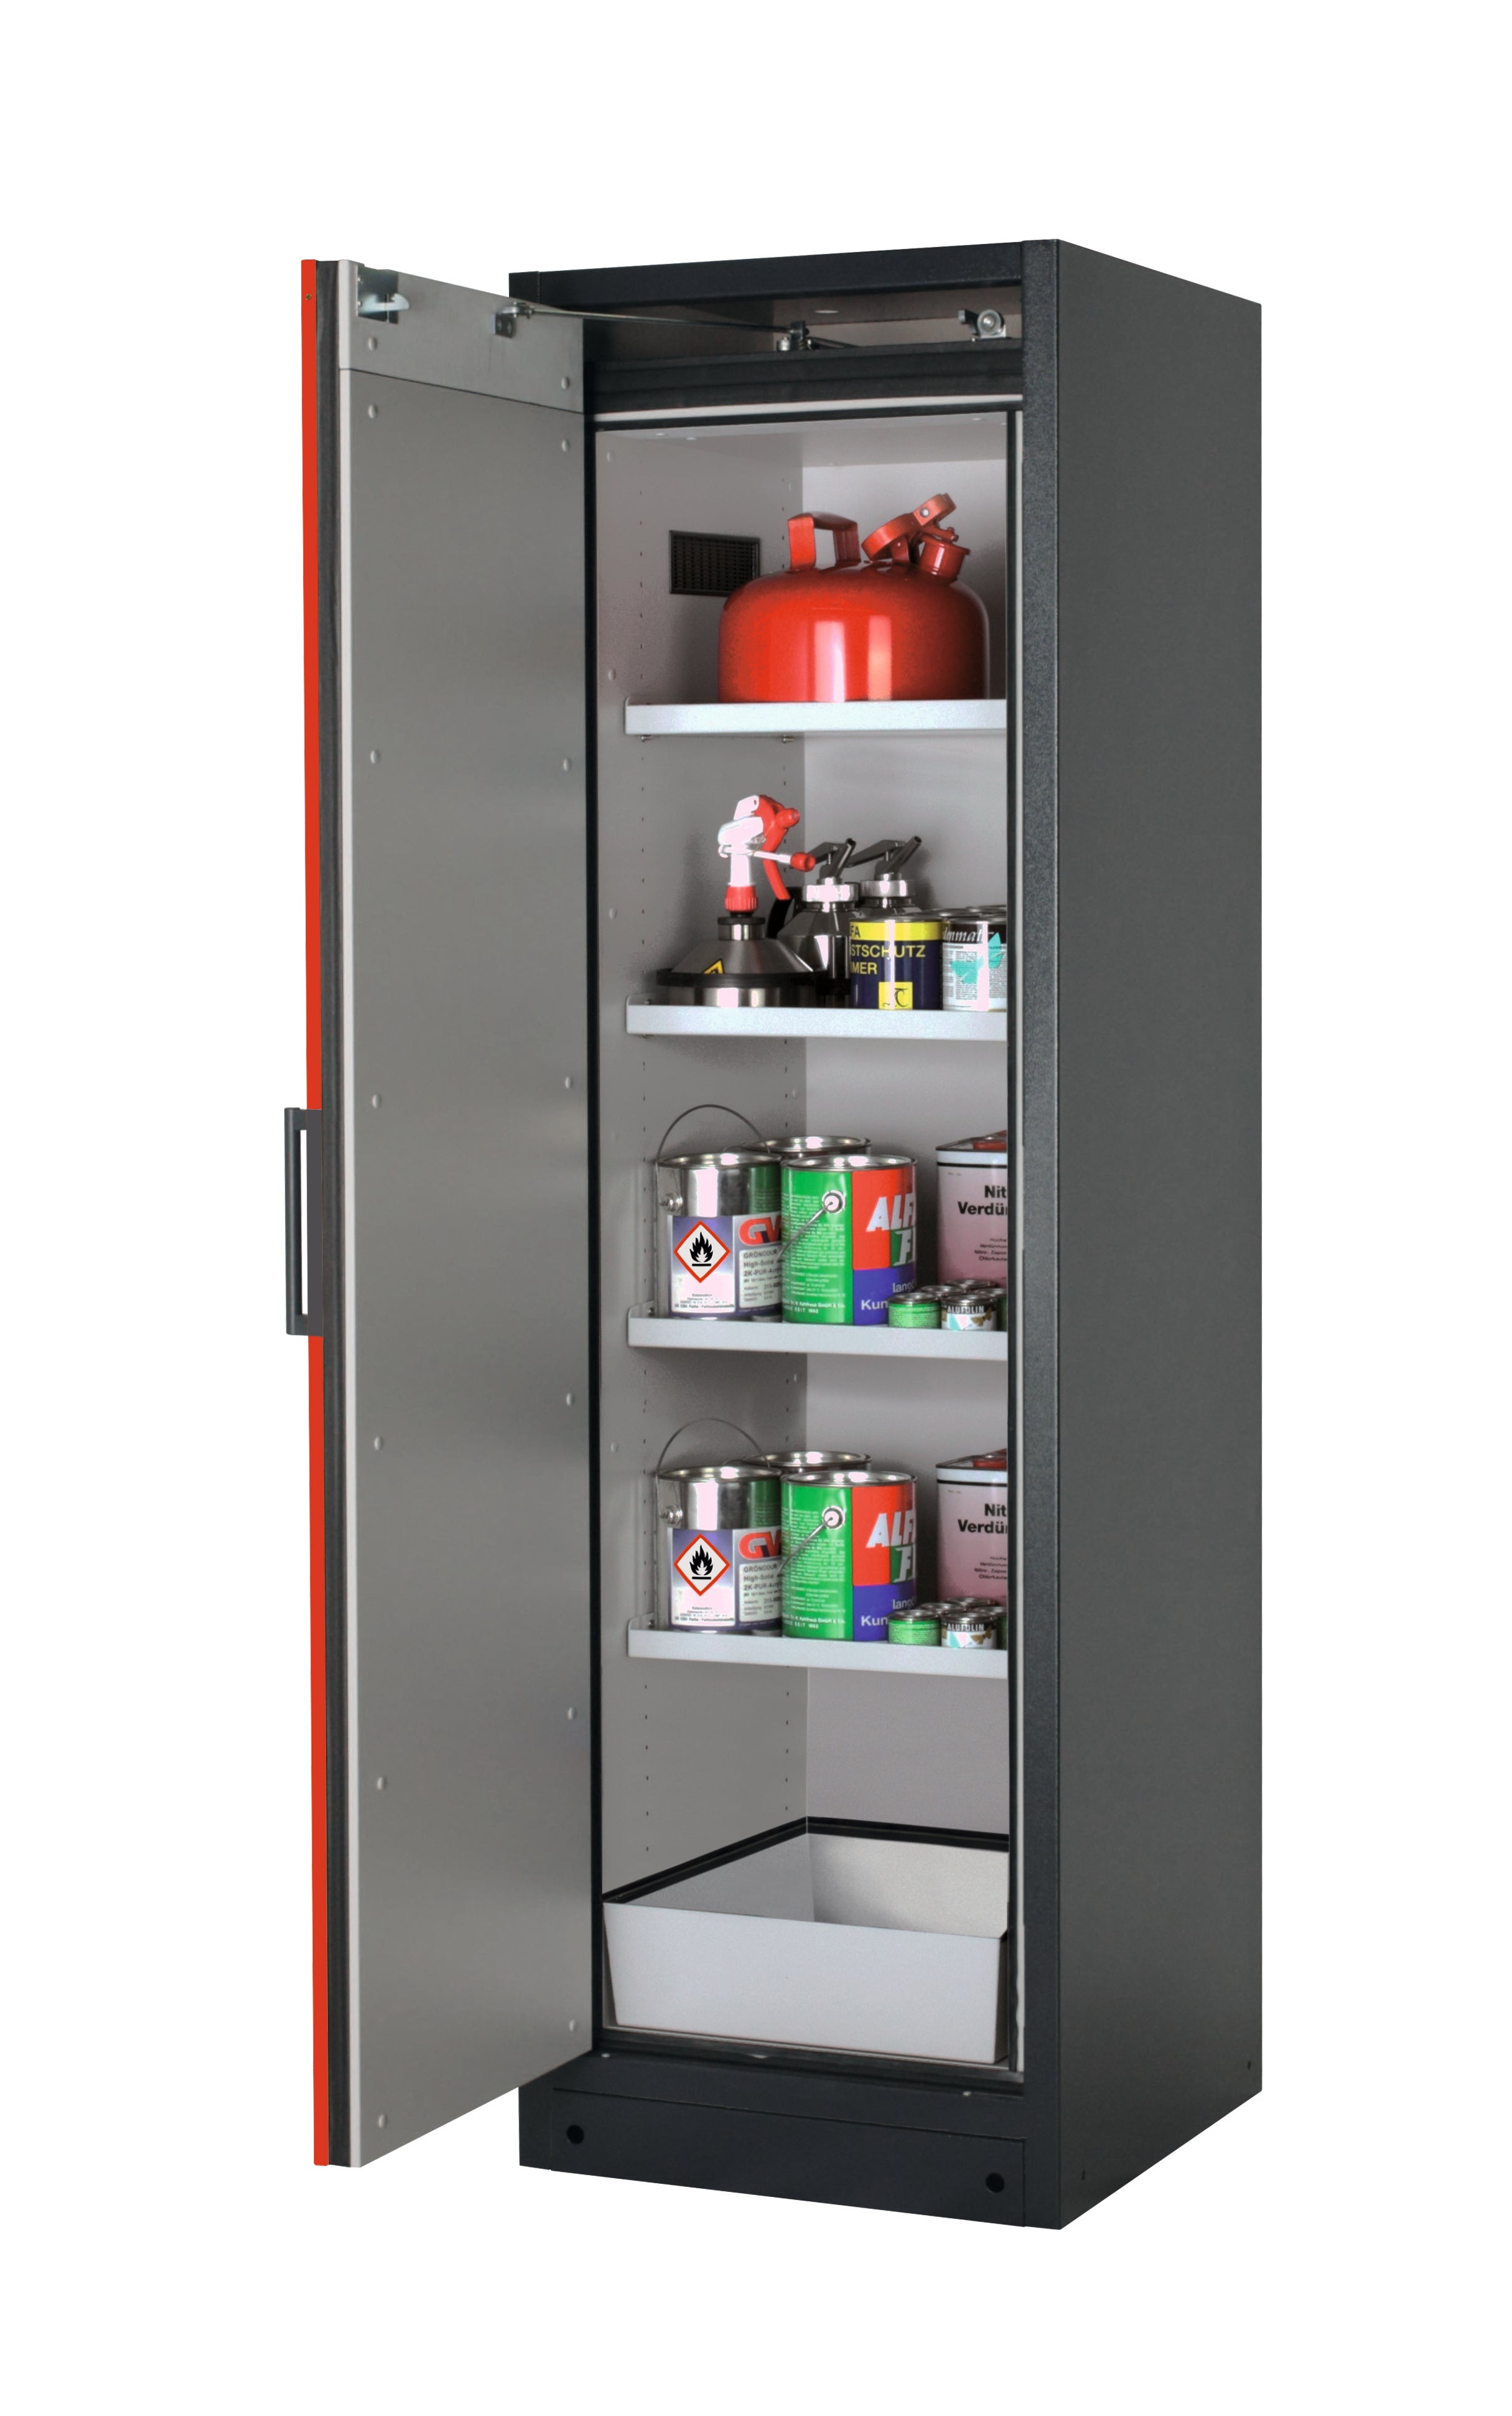 Type 90 safety storage cabinet Q-CLASSIC-90 model Q90.195.060 in traffic red RAL 3020 with 4x shelf standard (sheet steel),